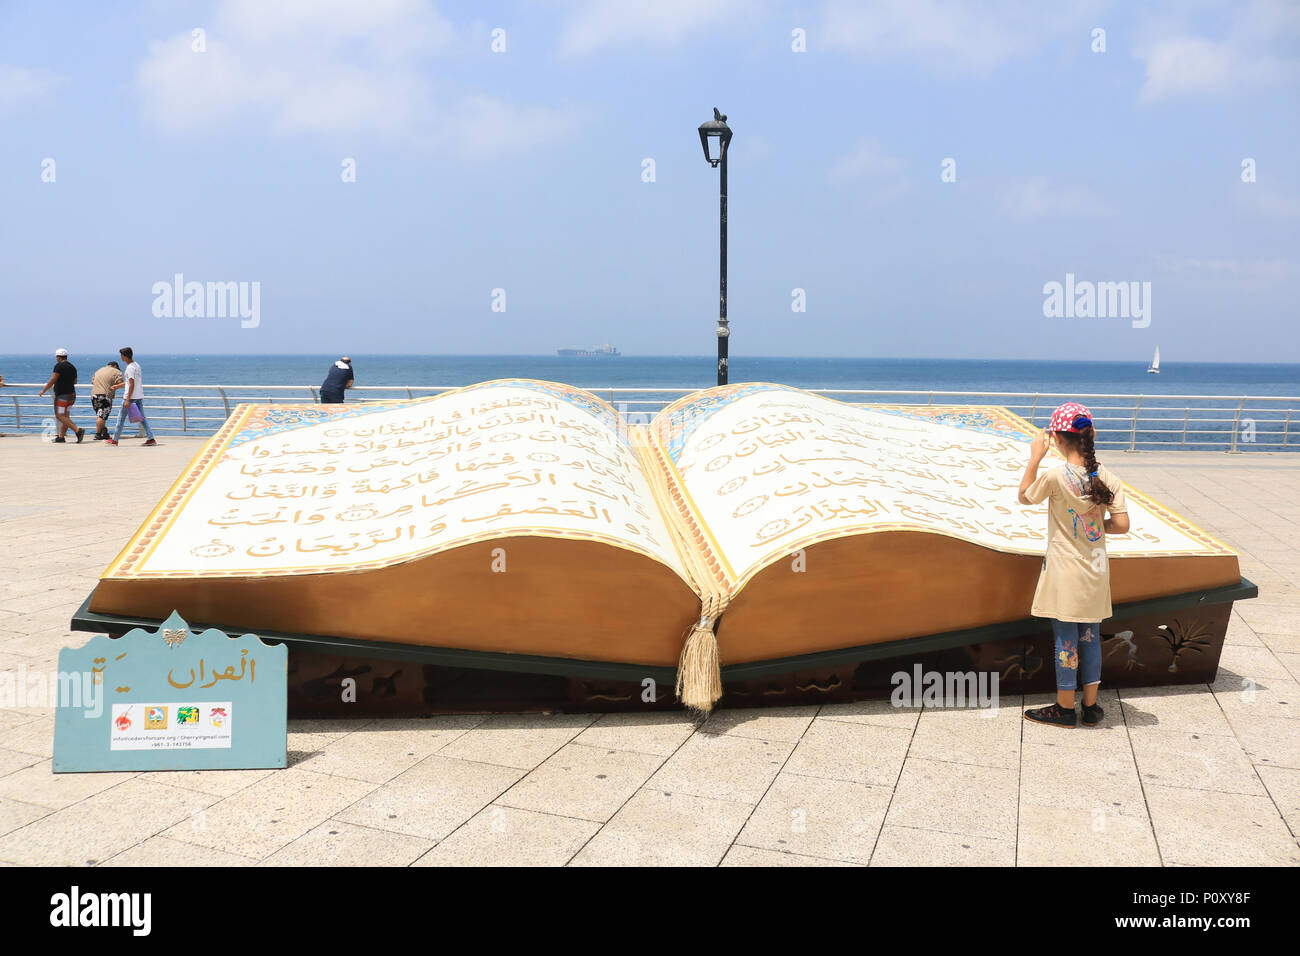 Beirut Lebanon. 1oth June. A large opened Quran book is displayed on the Beirut  seafront promenade  to celebrate the Islamic holy month of Ramadan which ends on 15th June. Ramdan traditionally falls on the ninth month of the Islamic calendar, and is observed by Muslims worldwide as a month of fasting (Sawm) to commemorate the first revelation of the Quran to the prophet Muhammad Credit: amer ghazzal/Alamy Live News Stock Photo